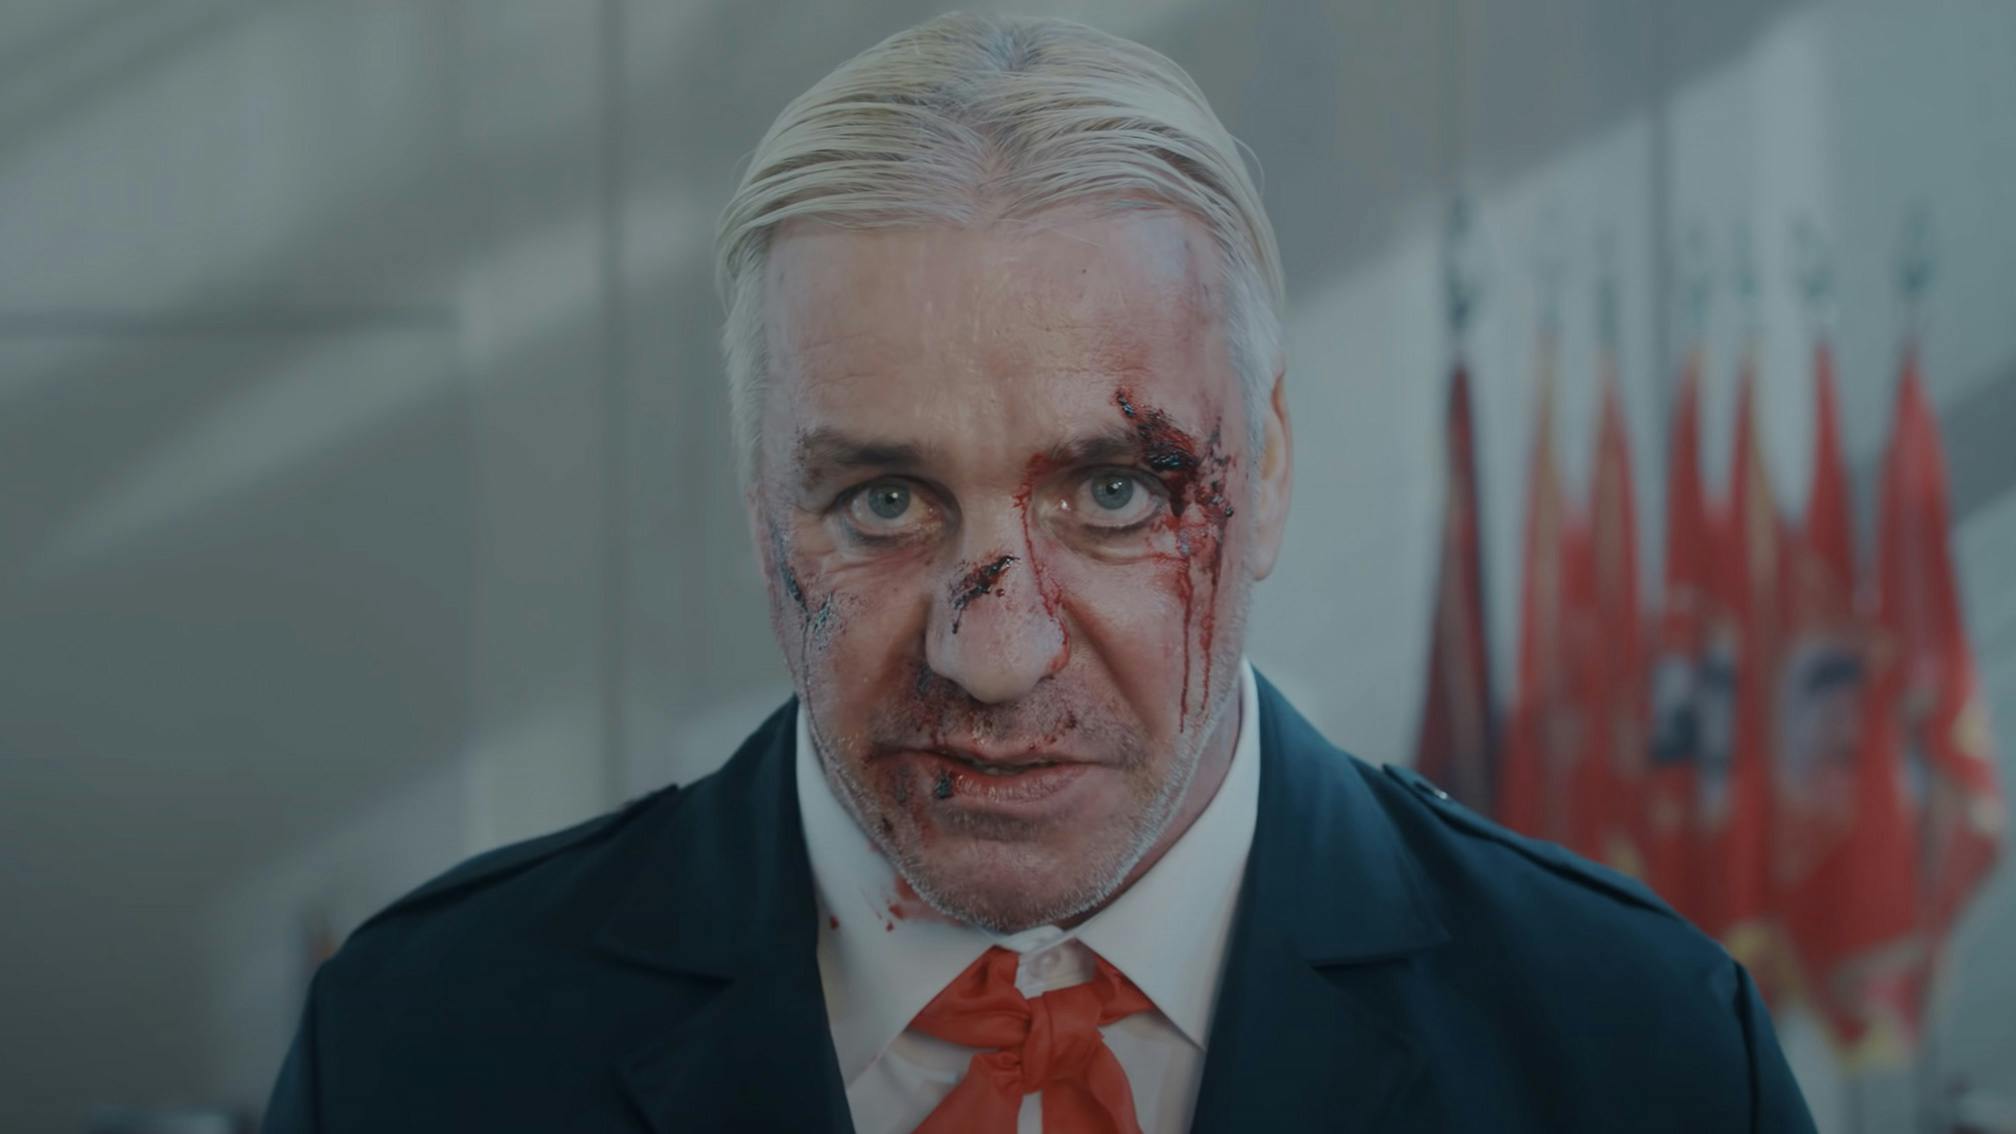 Till Lindemann releases gory video for Ich hasse Kinder (I Hate Kids)